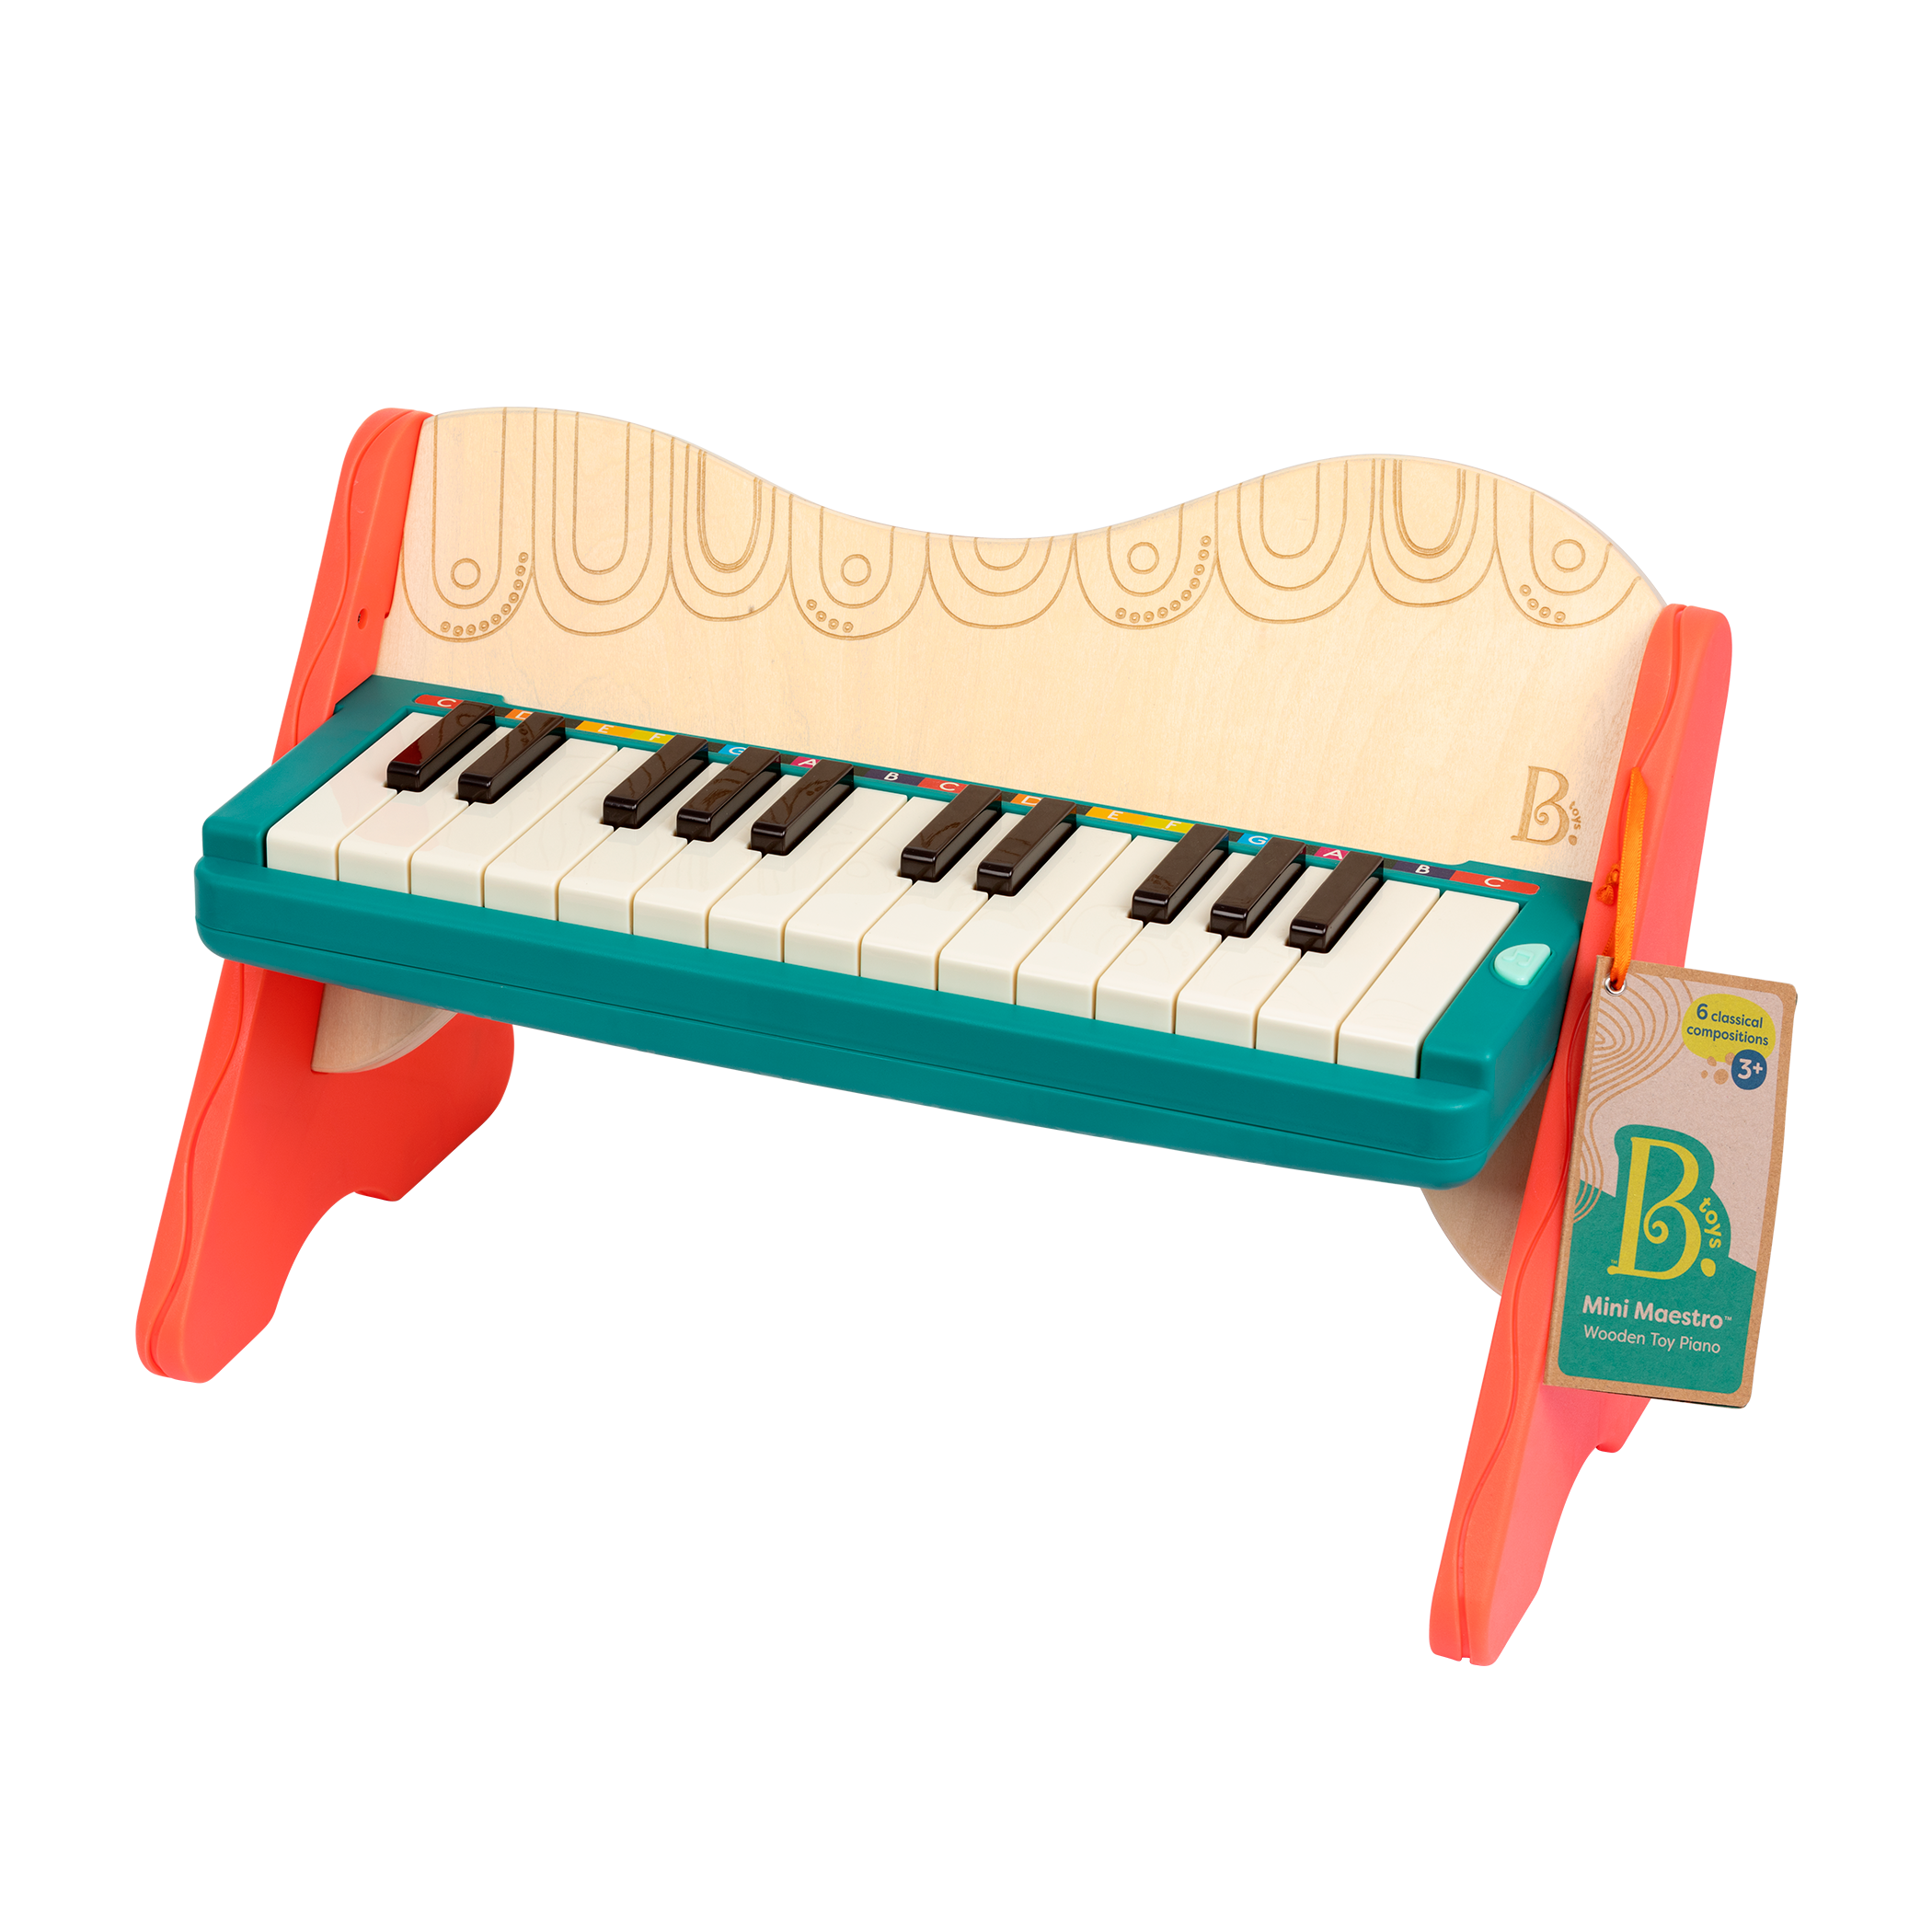 DUNELM Little Piano Tunes Interactive Musical Baby Toy New in Box 12m+ 